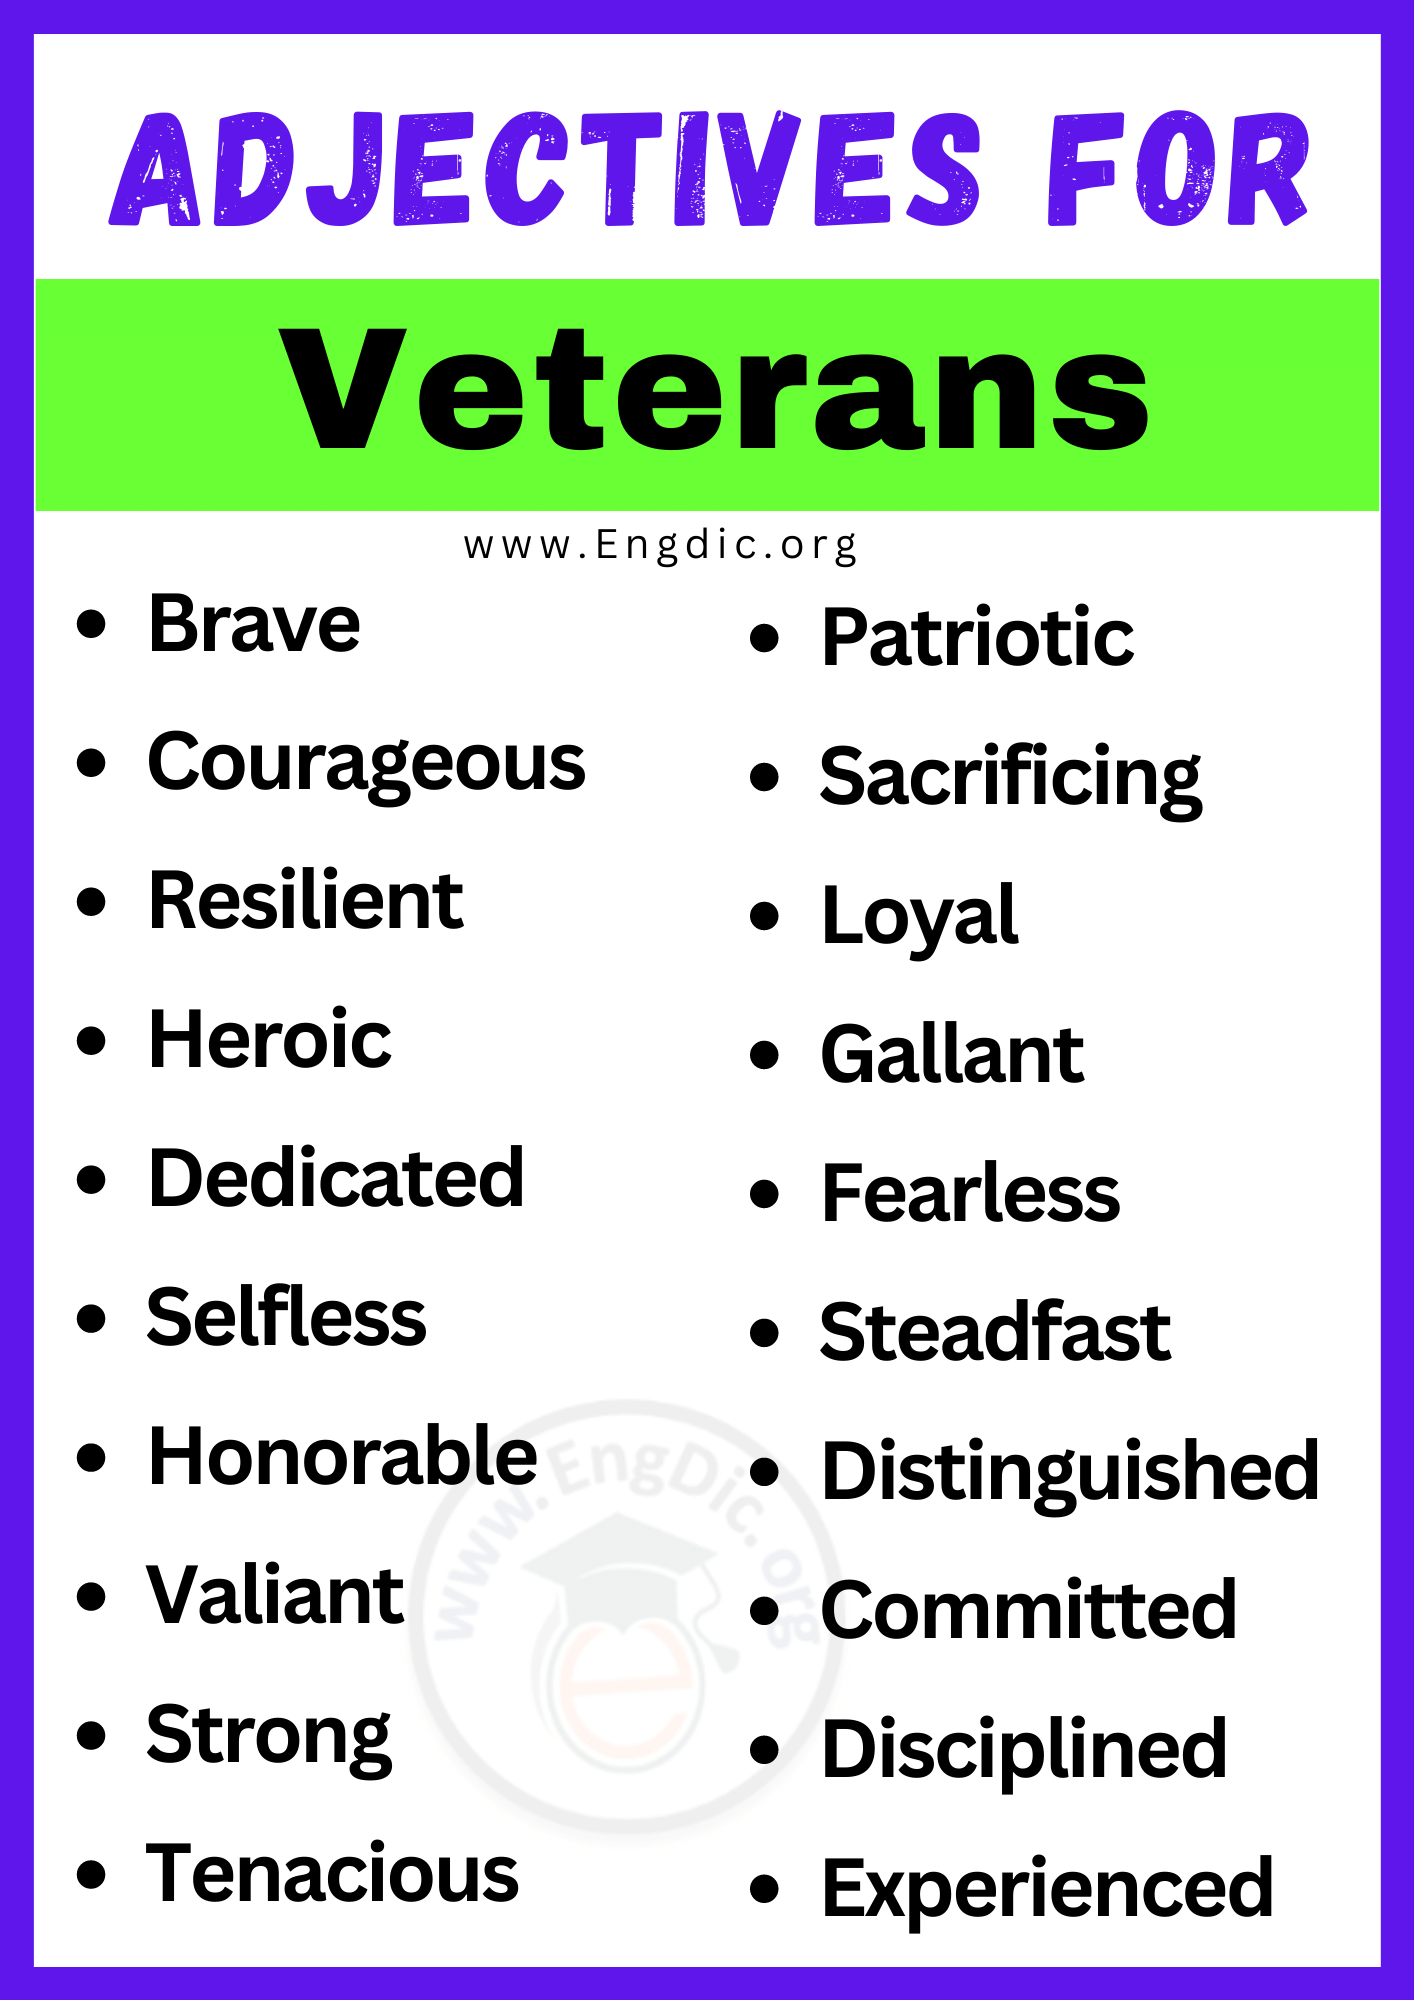 Adjectives for Veterans